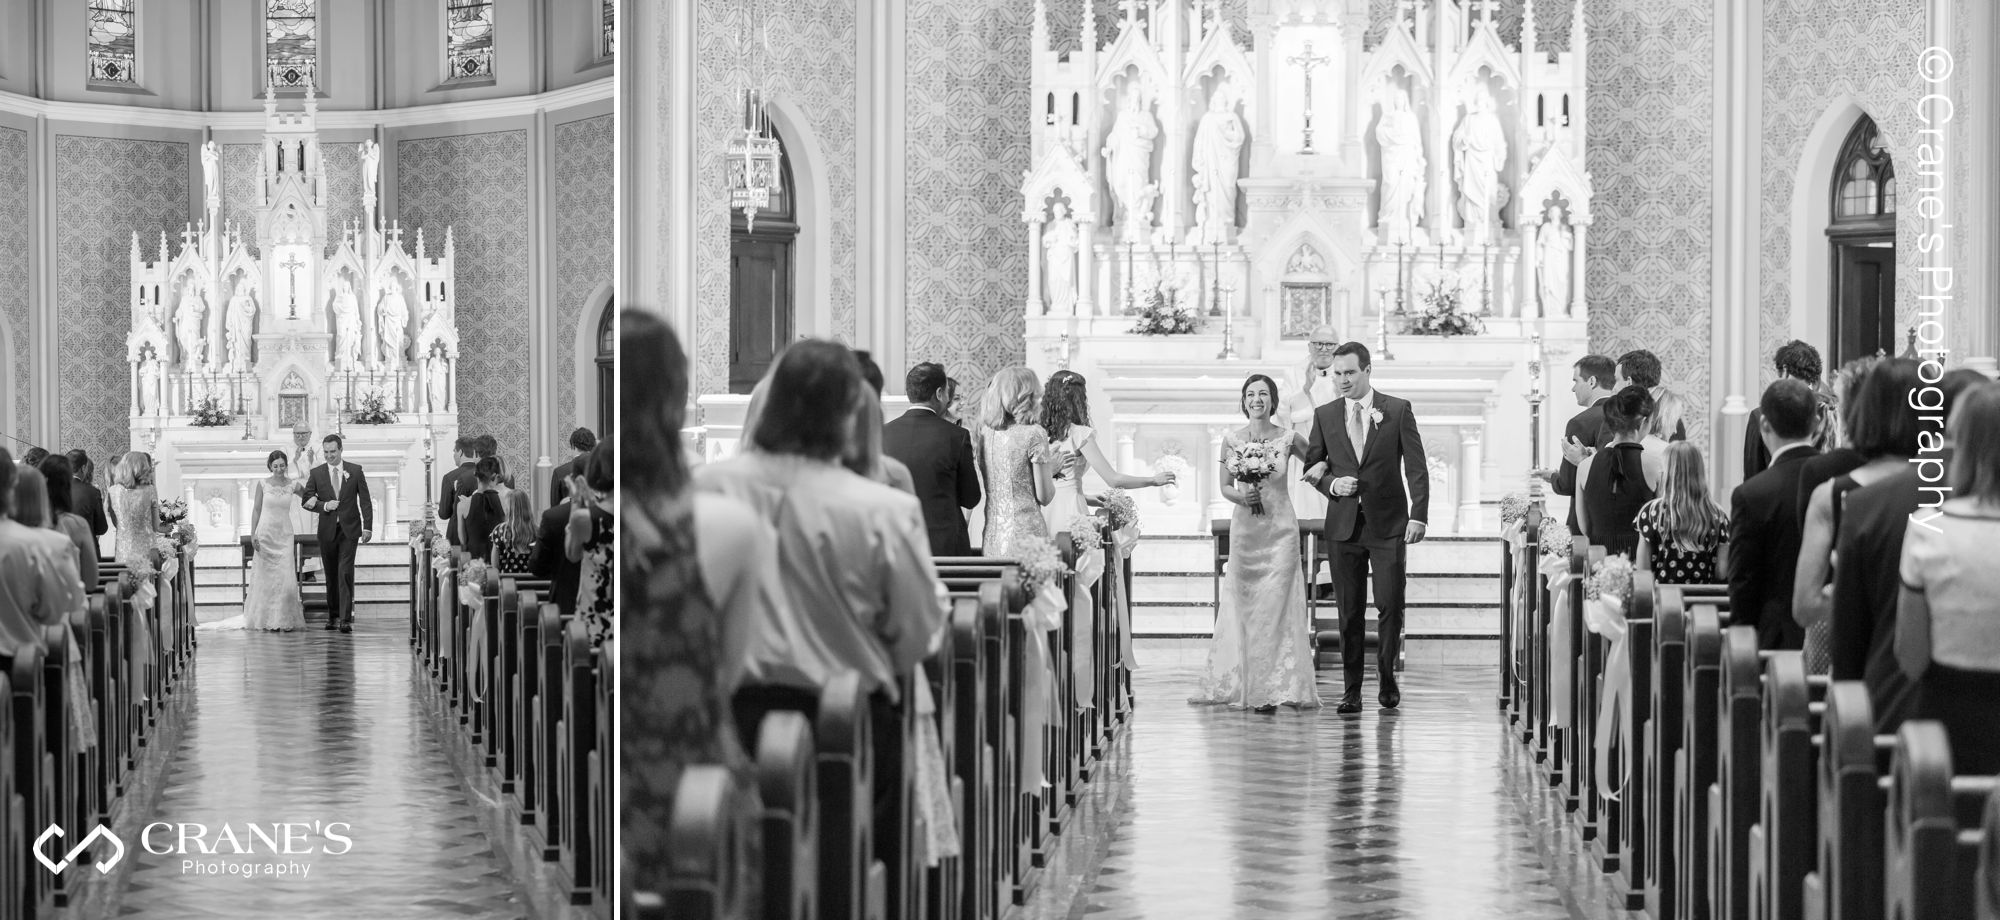 Bride and groom walk out at their Our Lady of Mount Carmel Chicago wedding